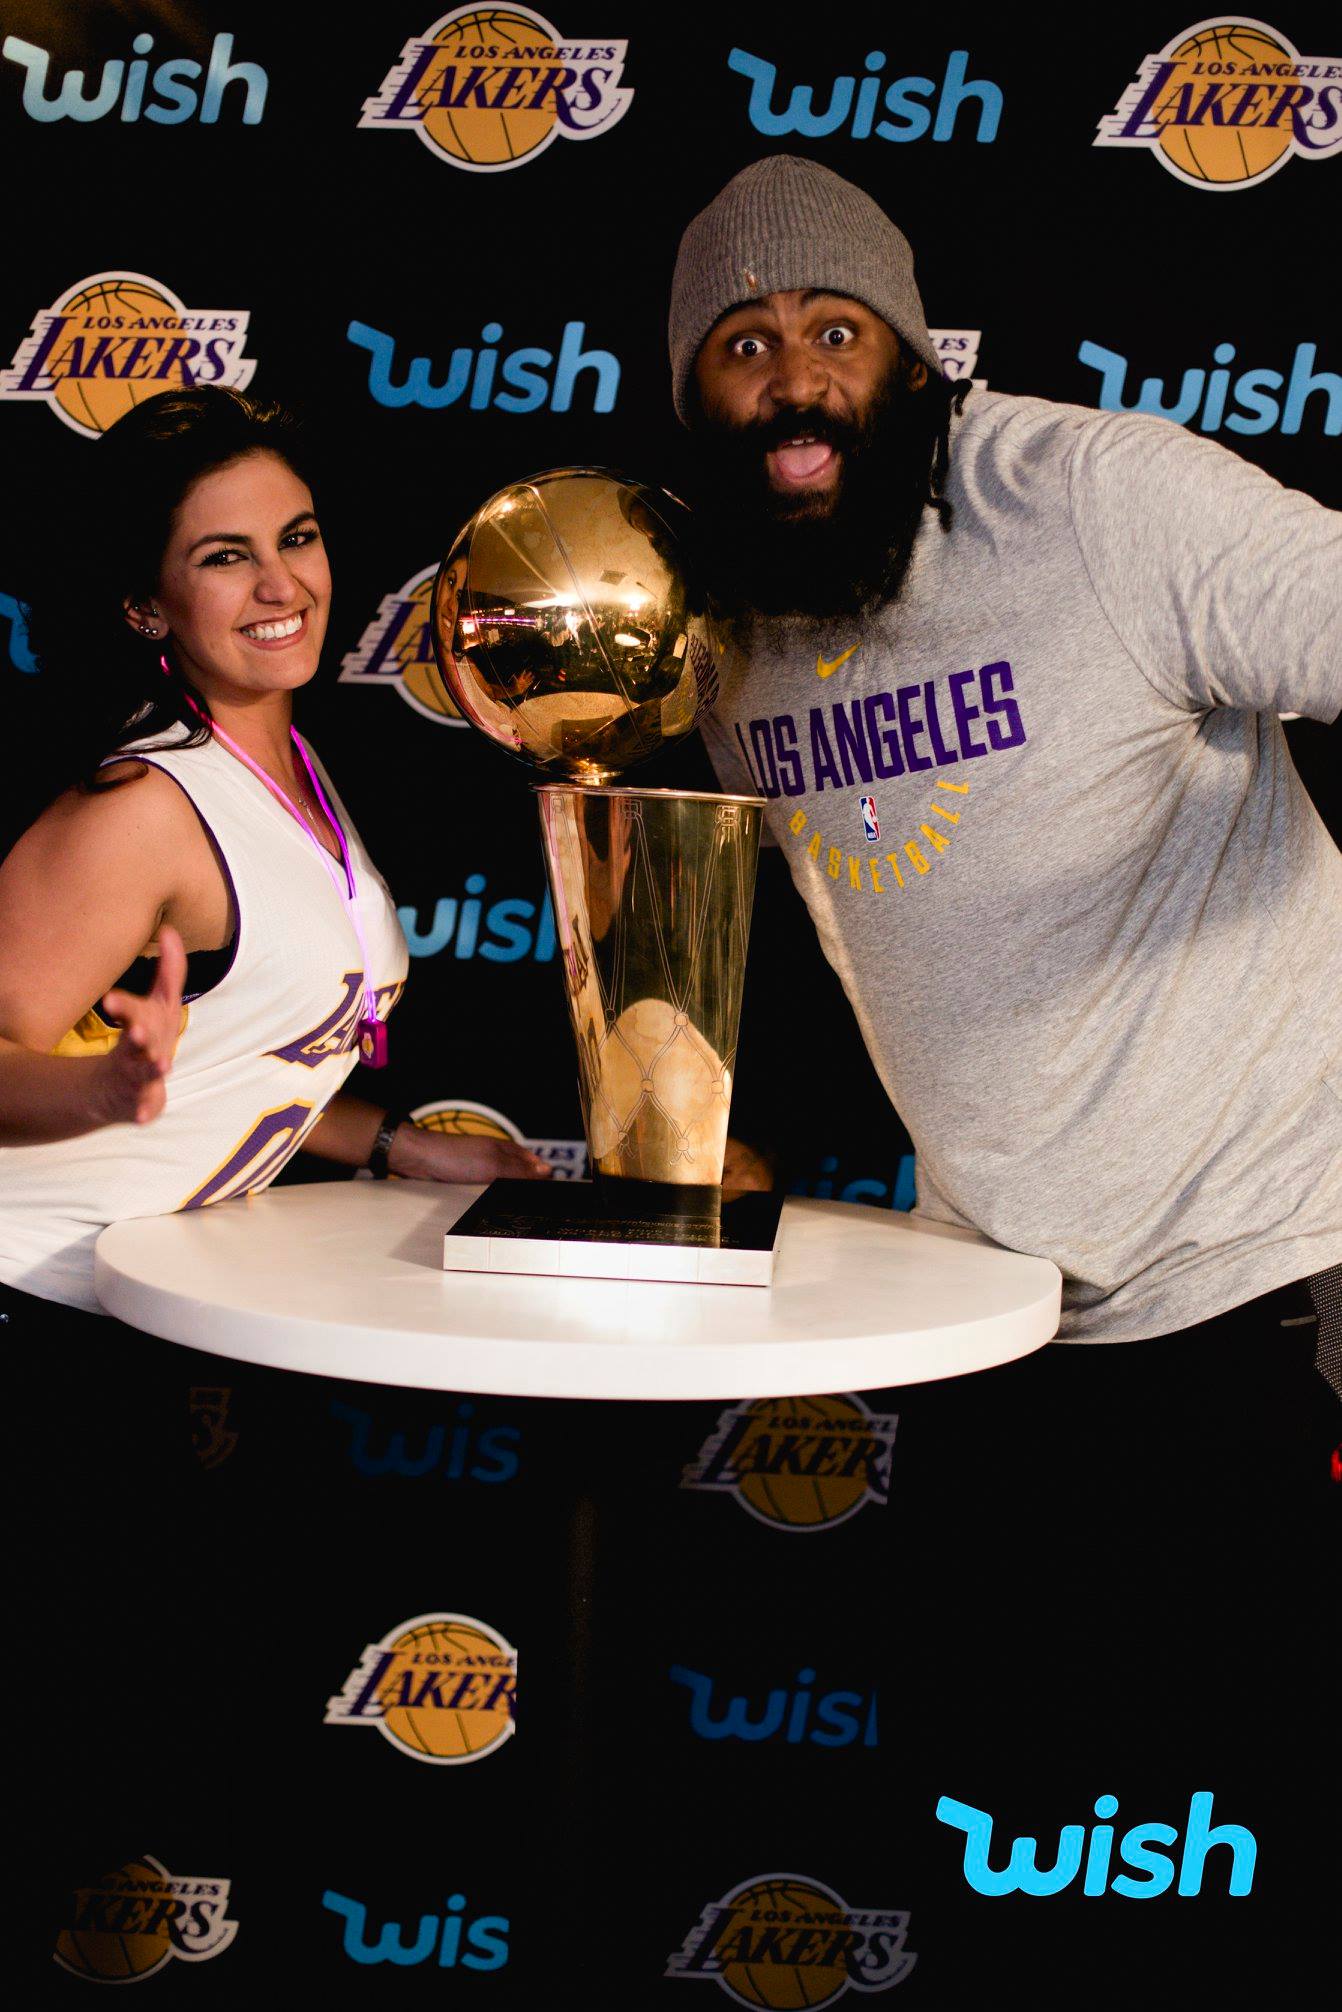 Replica Jersey Night with the Los Angeles Lakers + Wish Stars